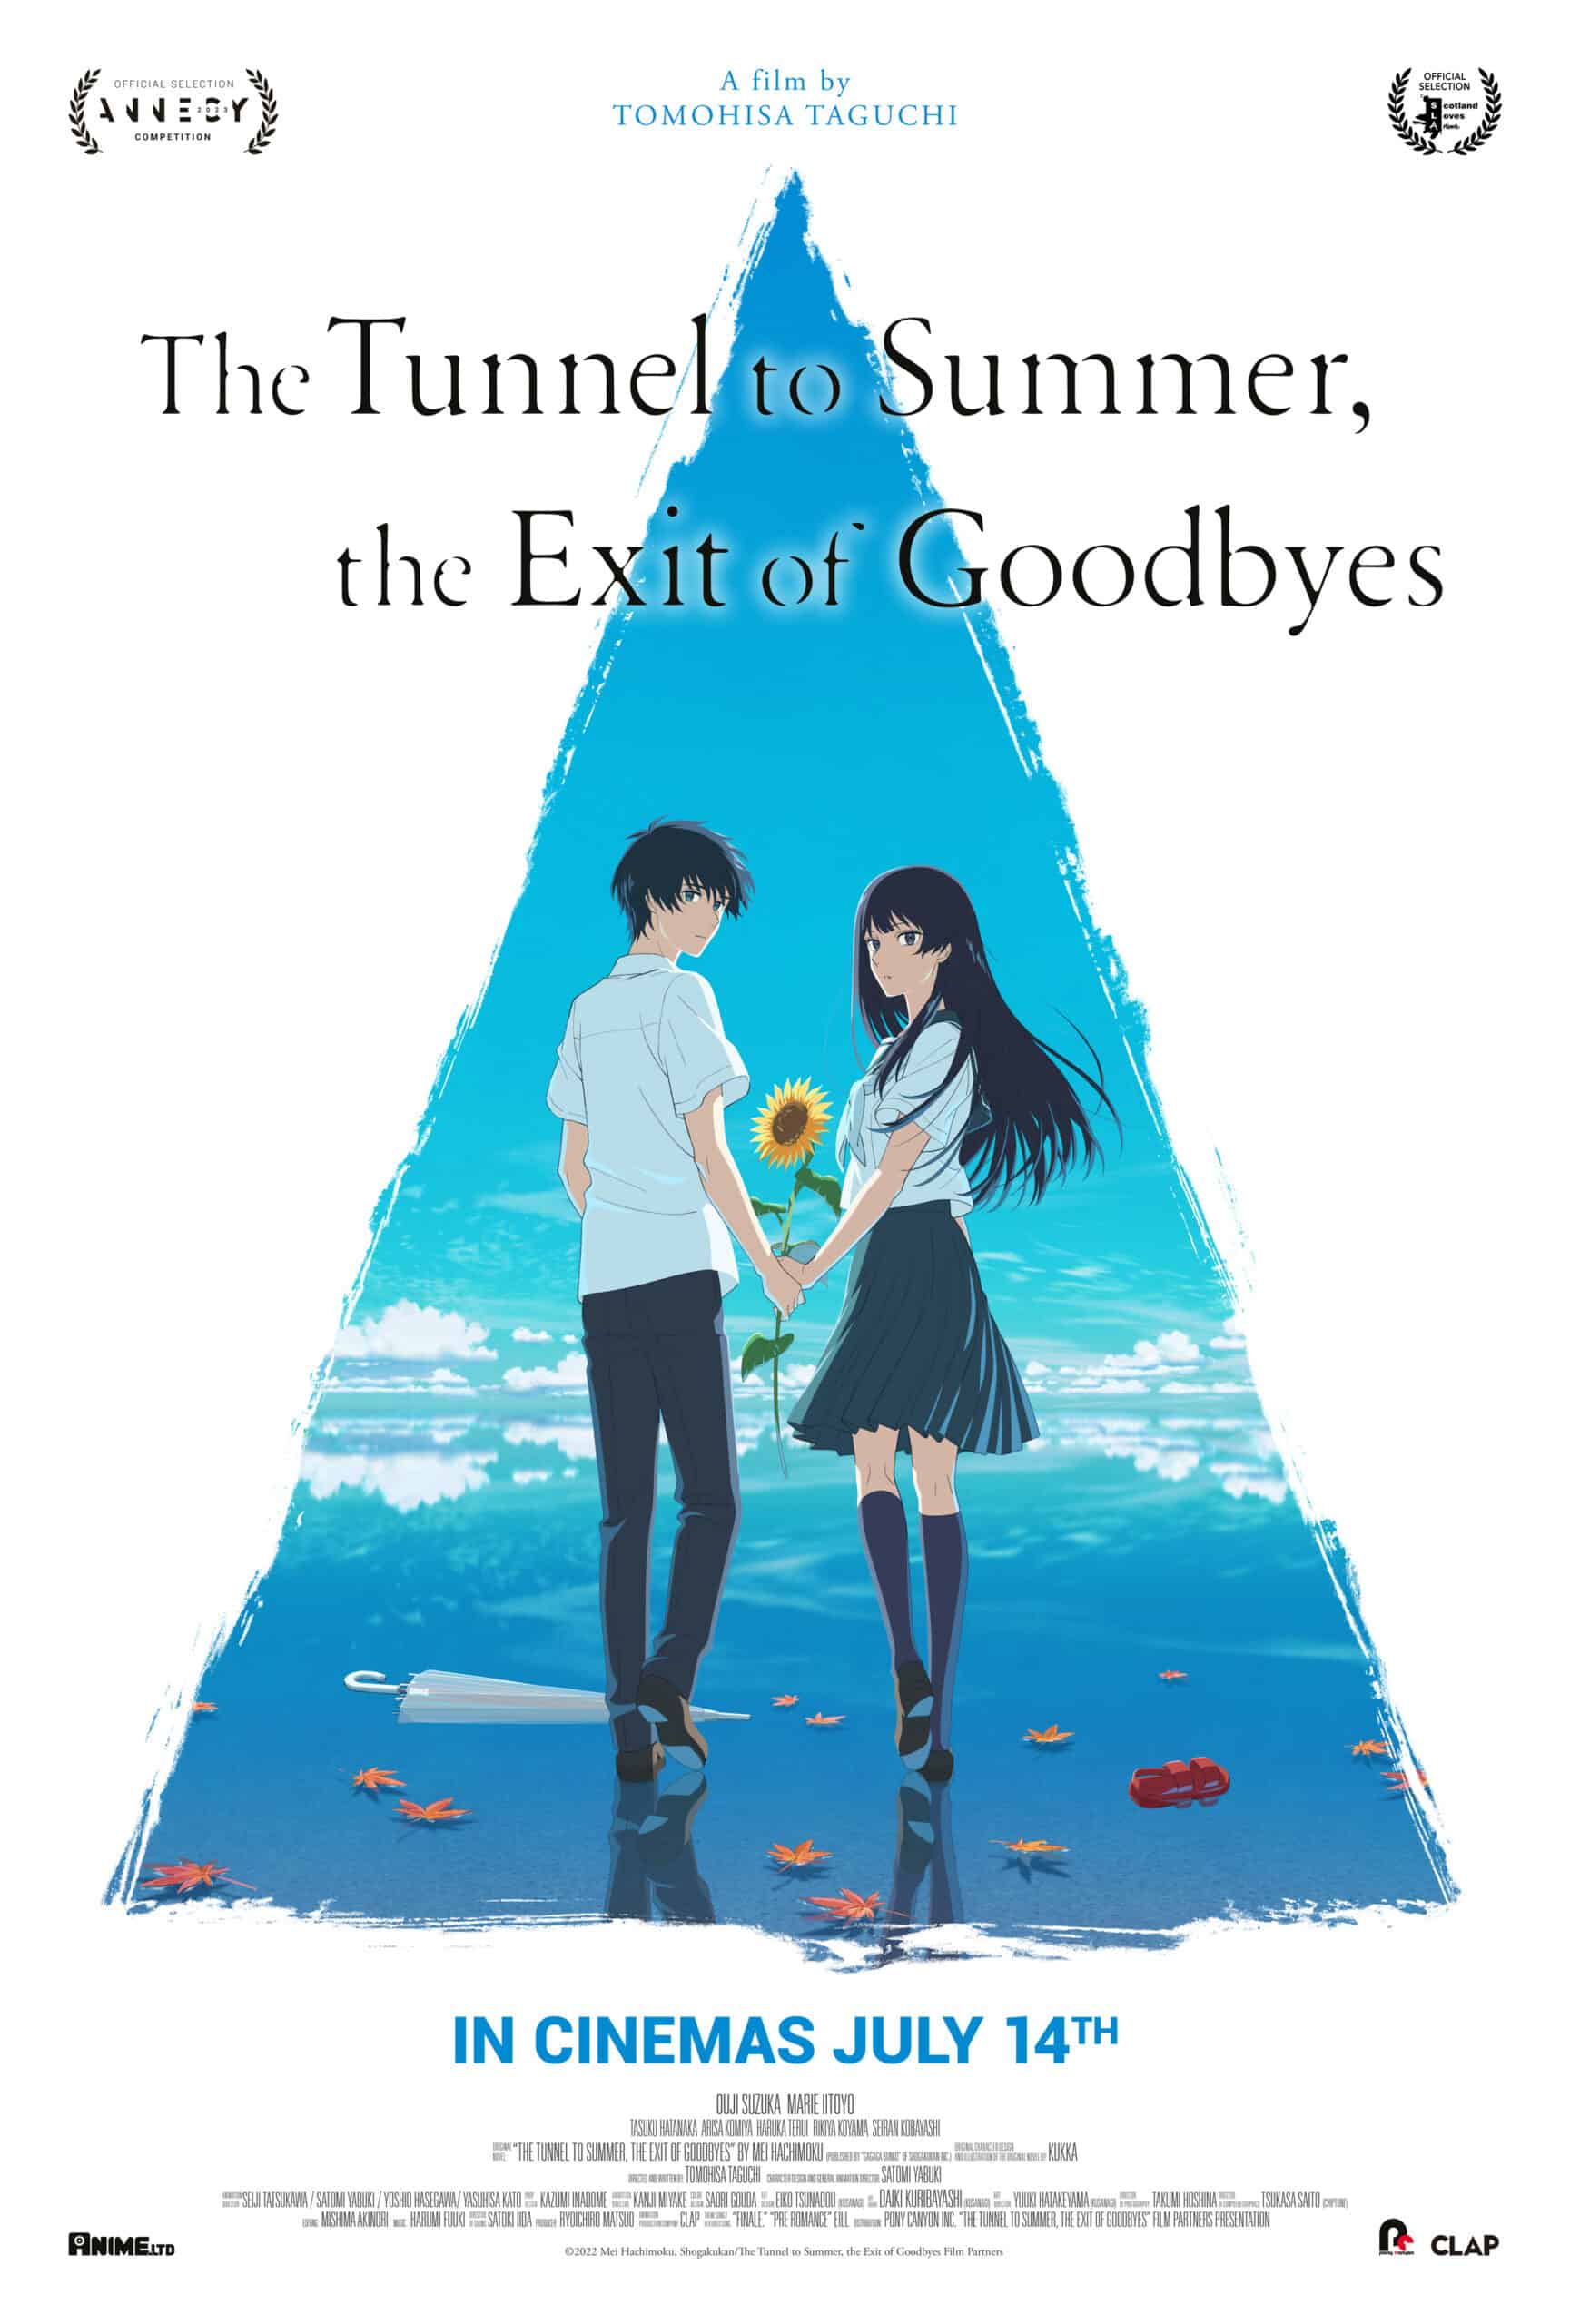 Anime: The Tunnel to Summer, the Exit of Goodbyes #anime #animetiktok , the tunnel to summer ending